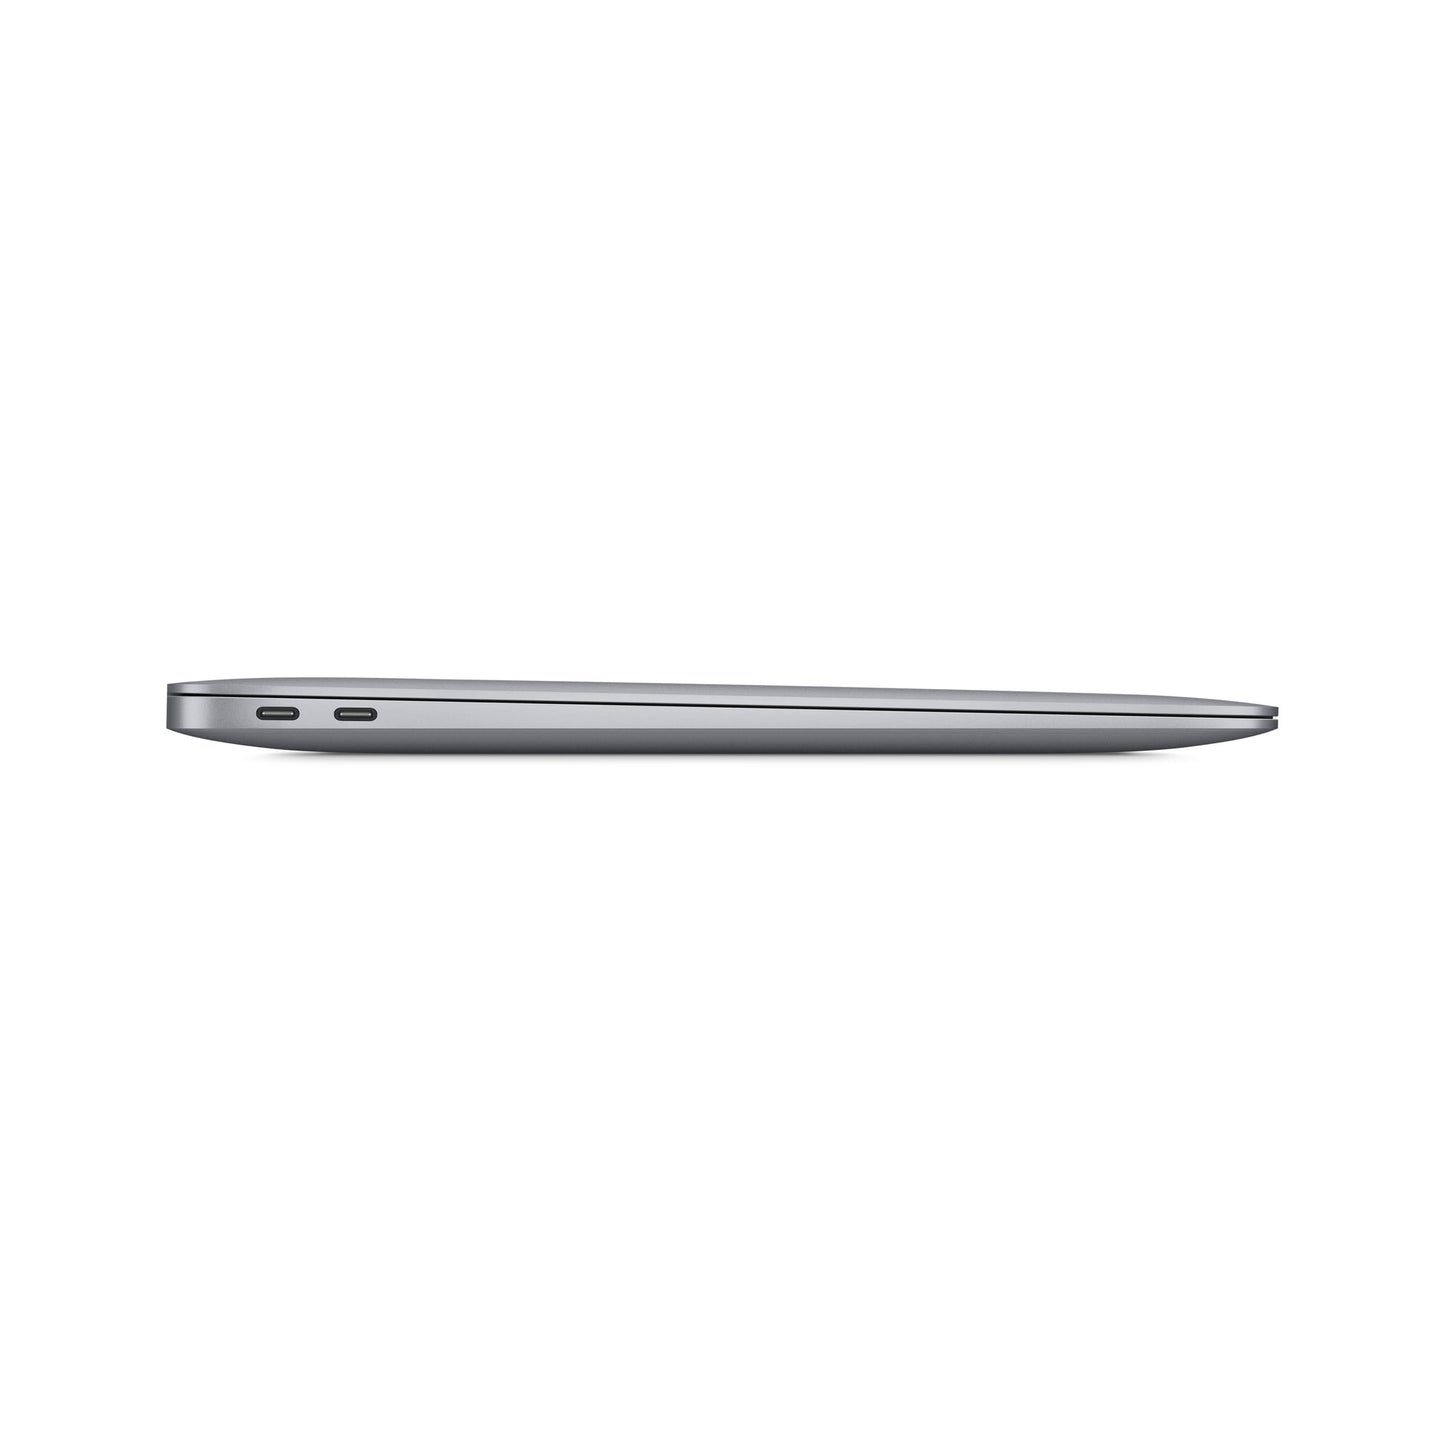 Apple MacBook Air 13 : Apple M1 chip with 8-core CPU and 7-core GPU, 256GB - Space Grey